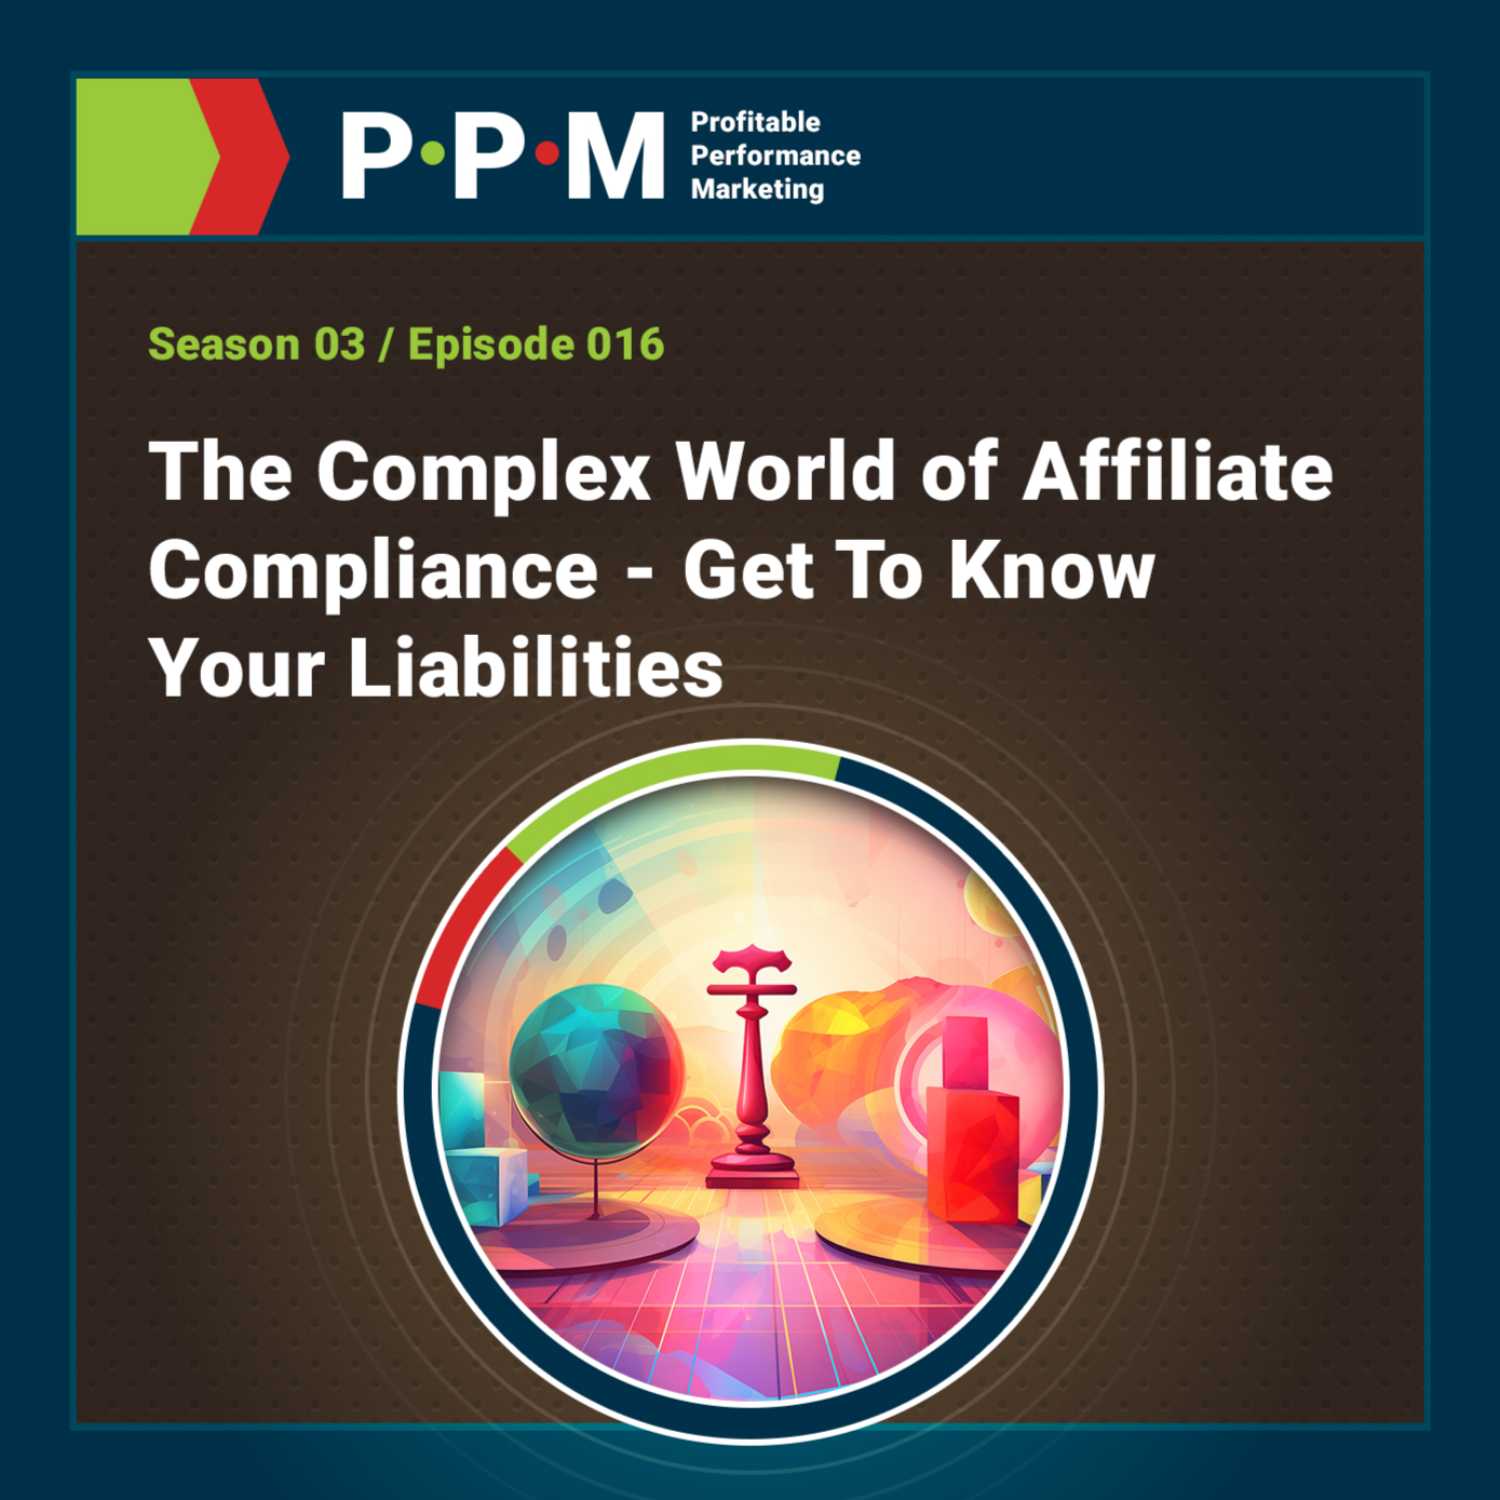 The Complex World of Affiliate Compliance - Get To Know Your Liabilities